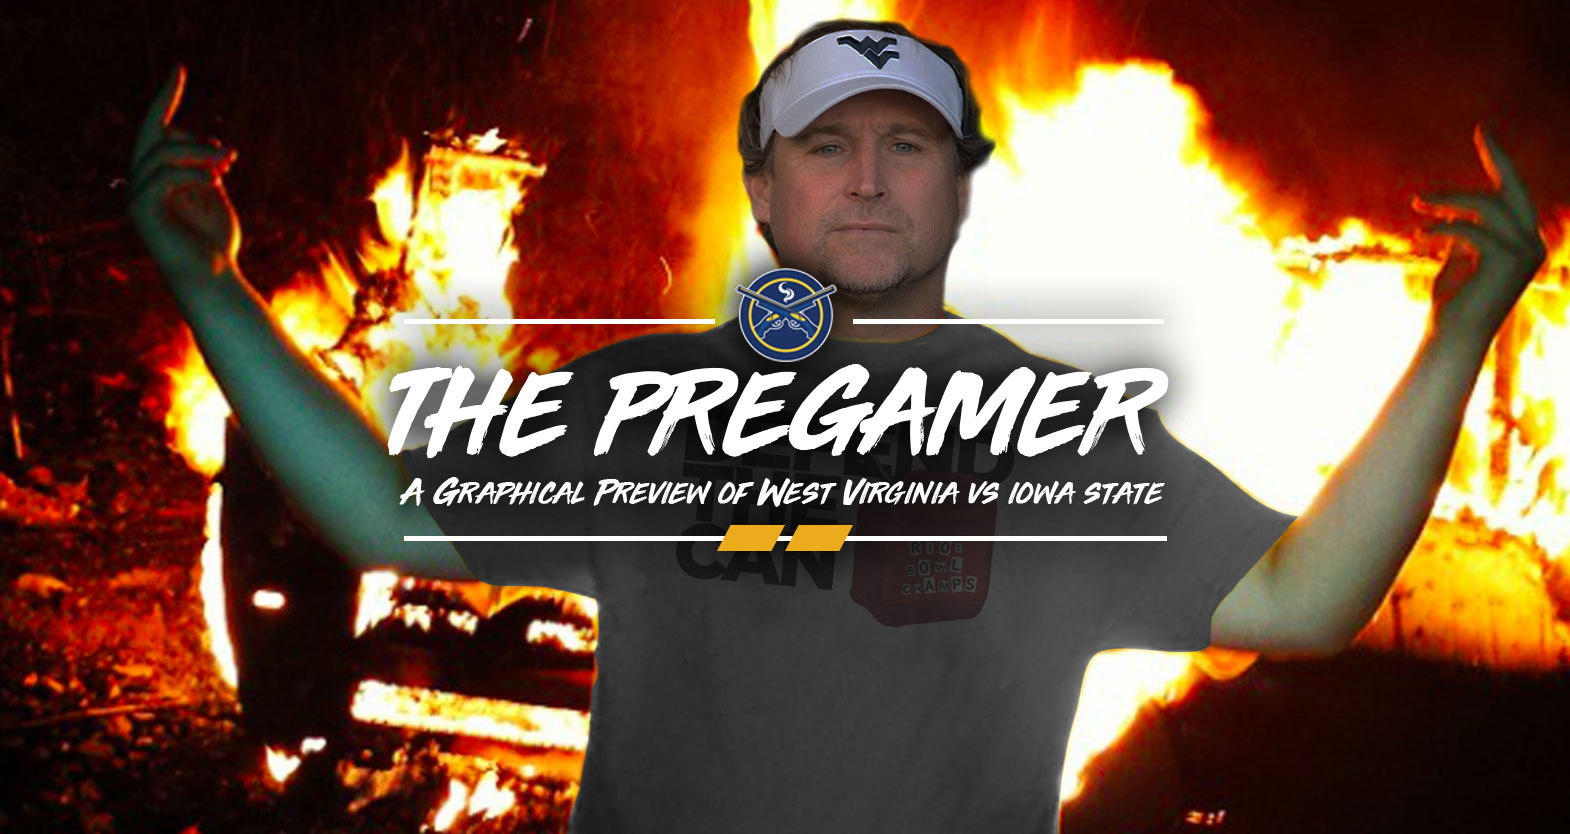 THE PREGAMER: A Graphical Preview of West Virginia vs. Iowa State